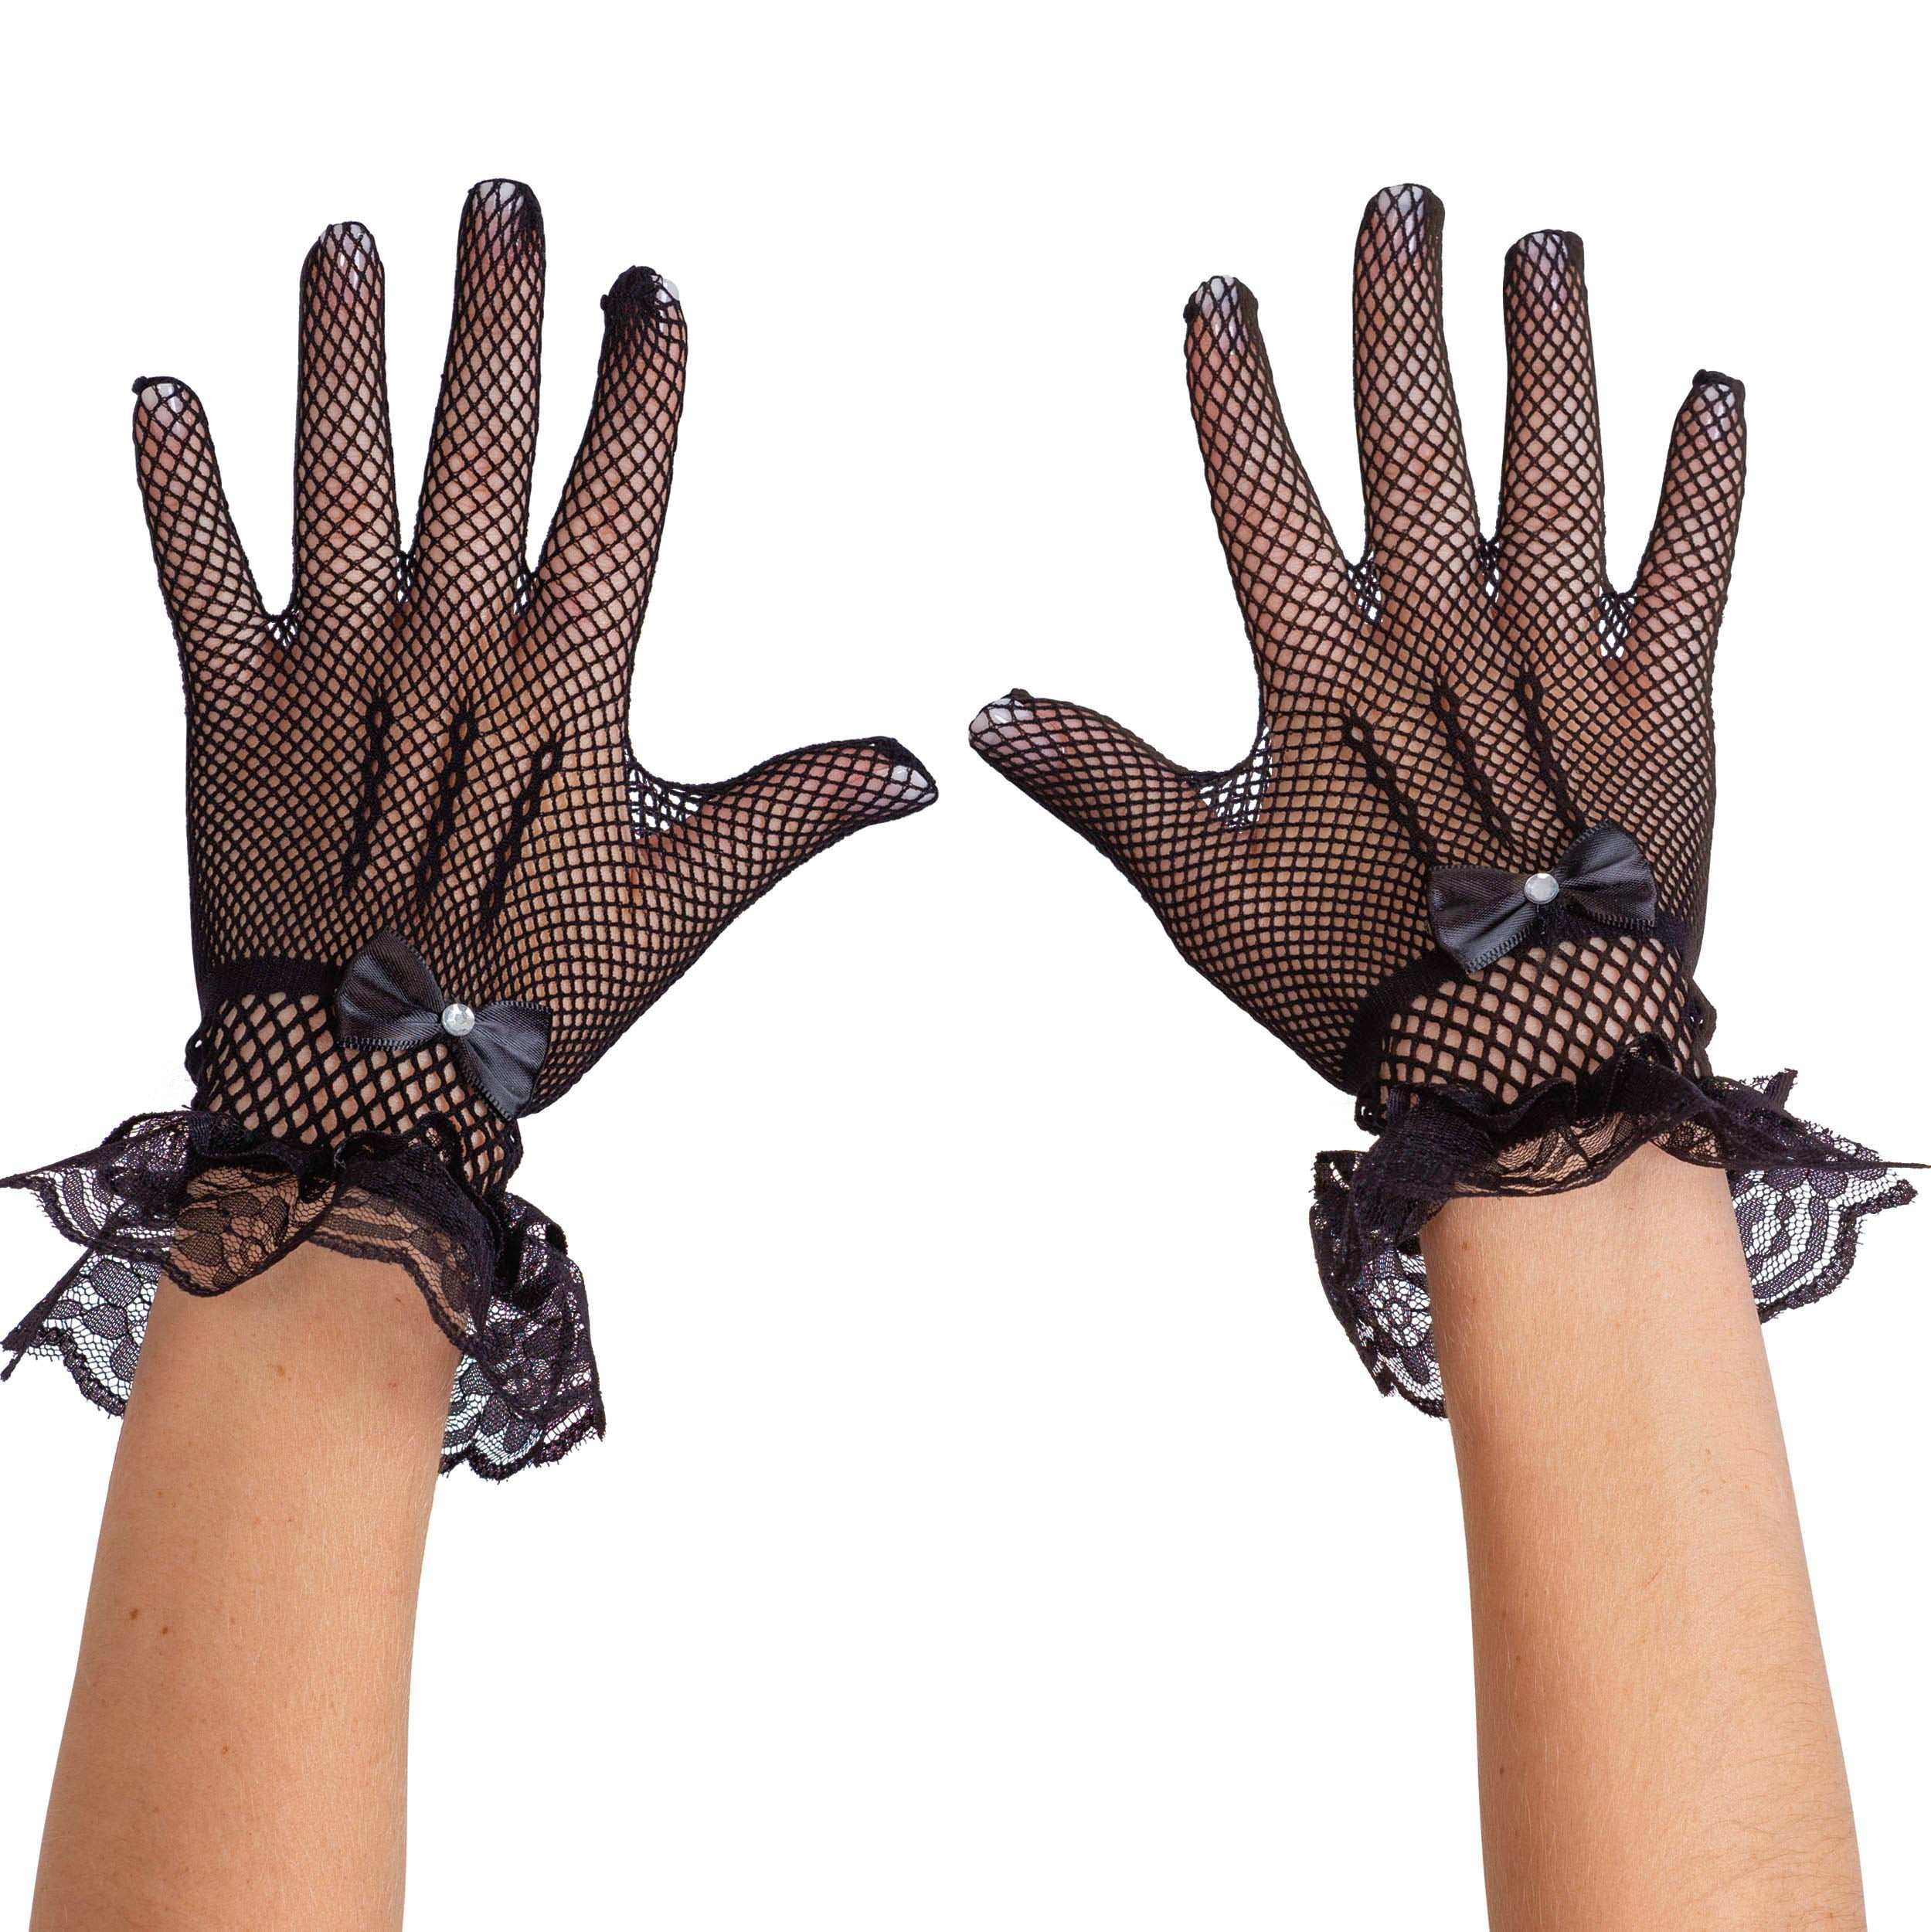 GLOVES BARBIE DOLL MASQUERADE GALA BLACK ELBOW FAUX JEWELED GLOVE ACCESSORY